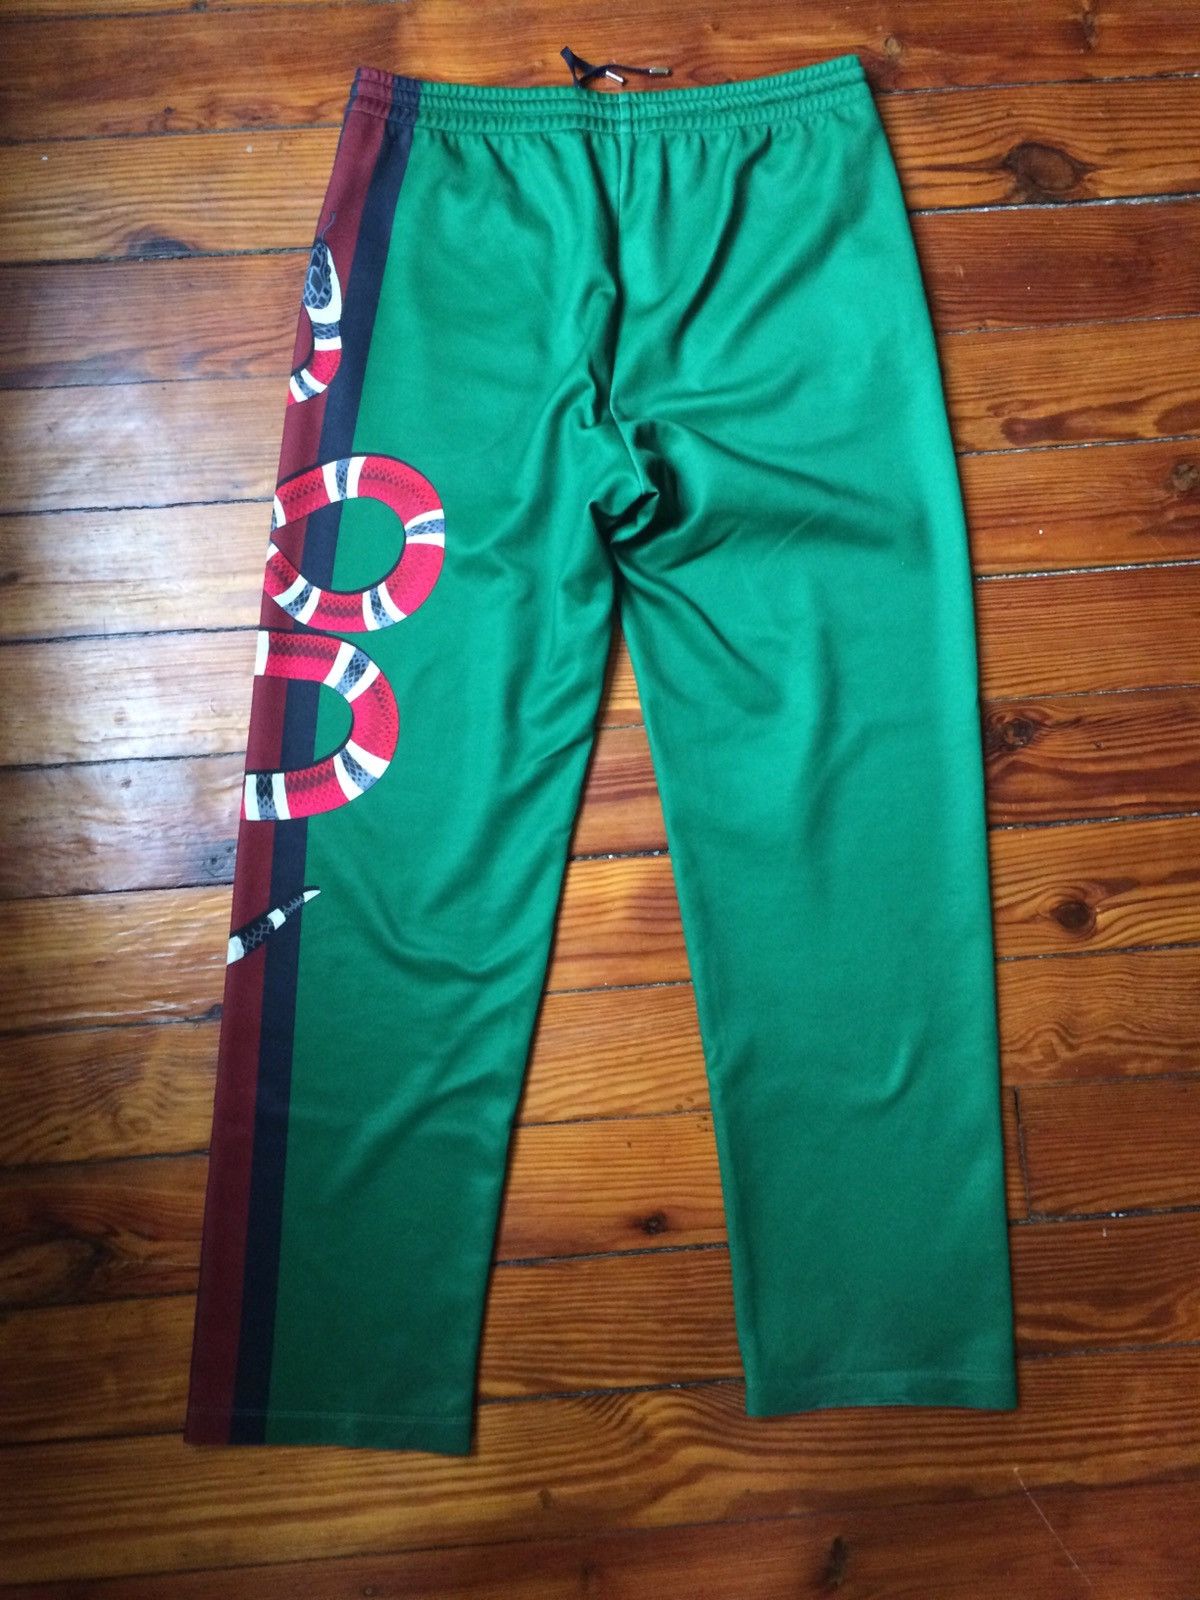 Gucci Snake Track Pants Size US 31 - 2 Preview